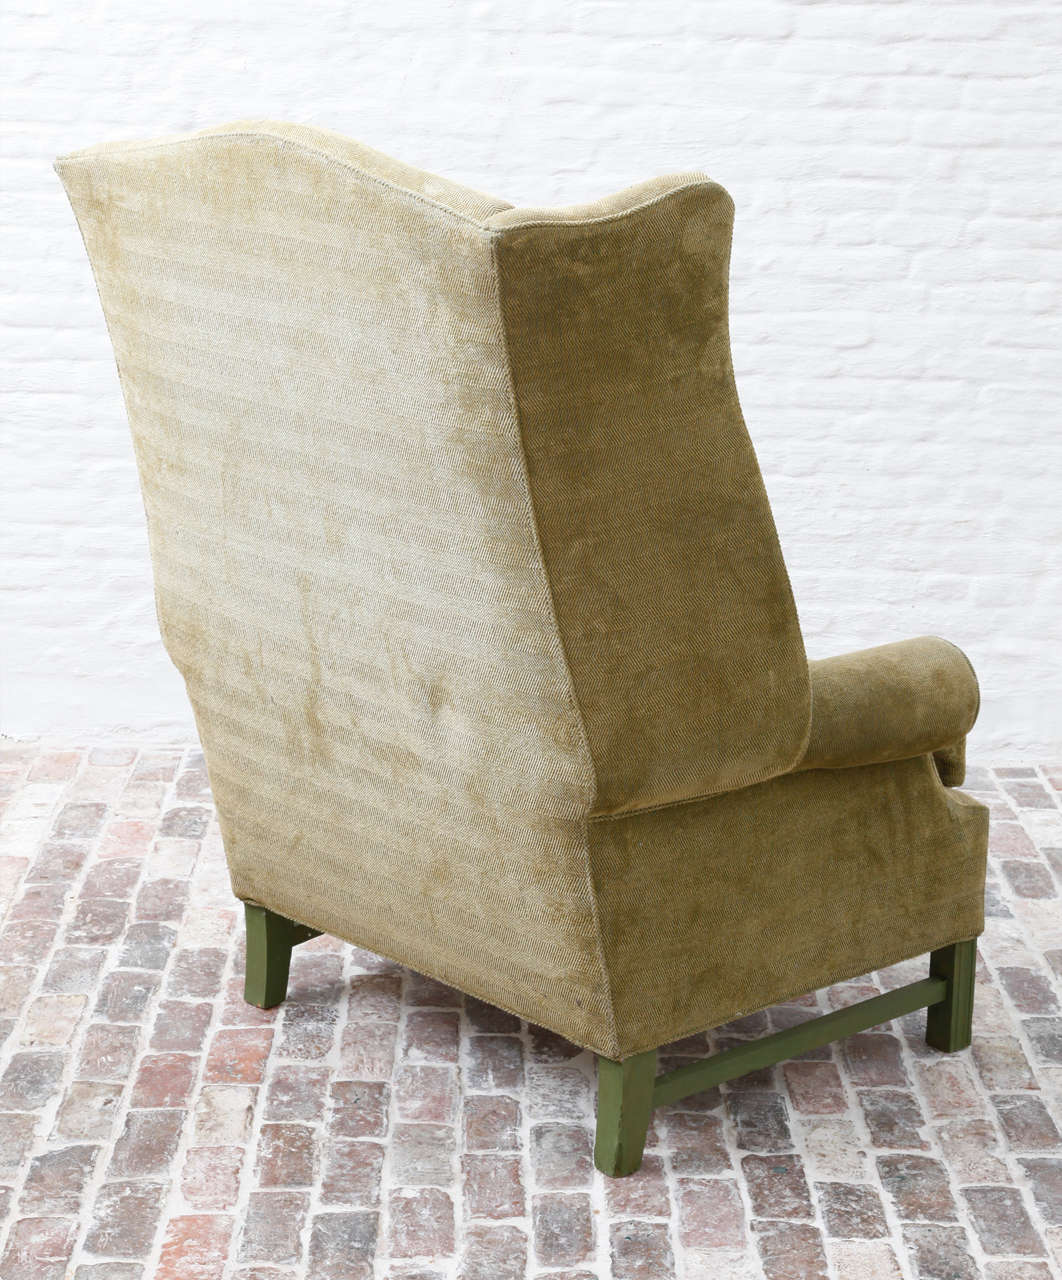 Green Painted Oversized English Wingback Armchair In Excellent Condition For Sale In Sint-Kruis, BE